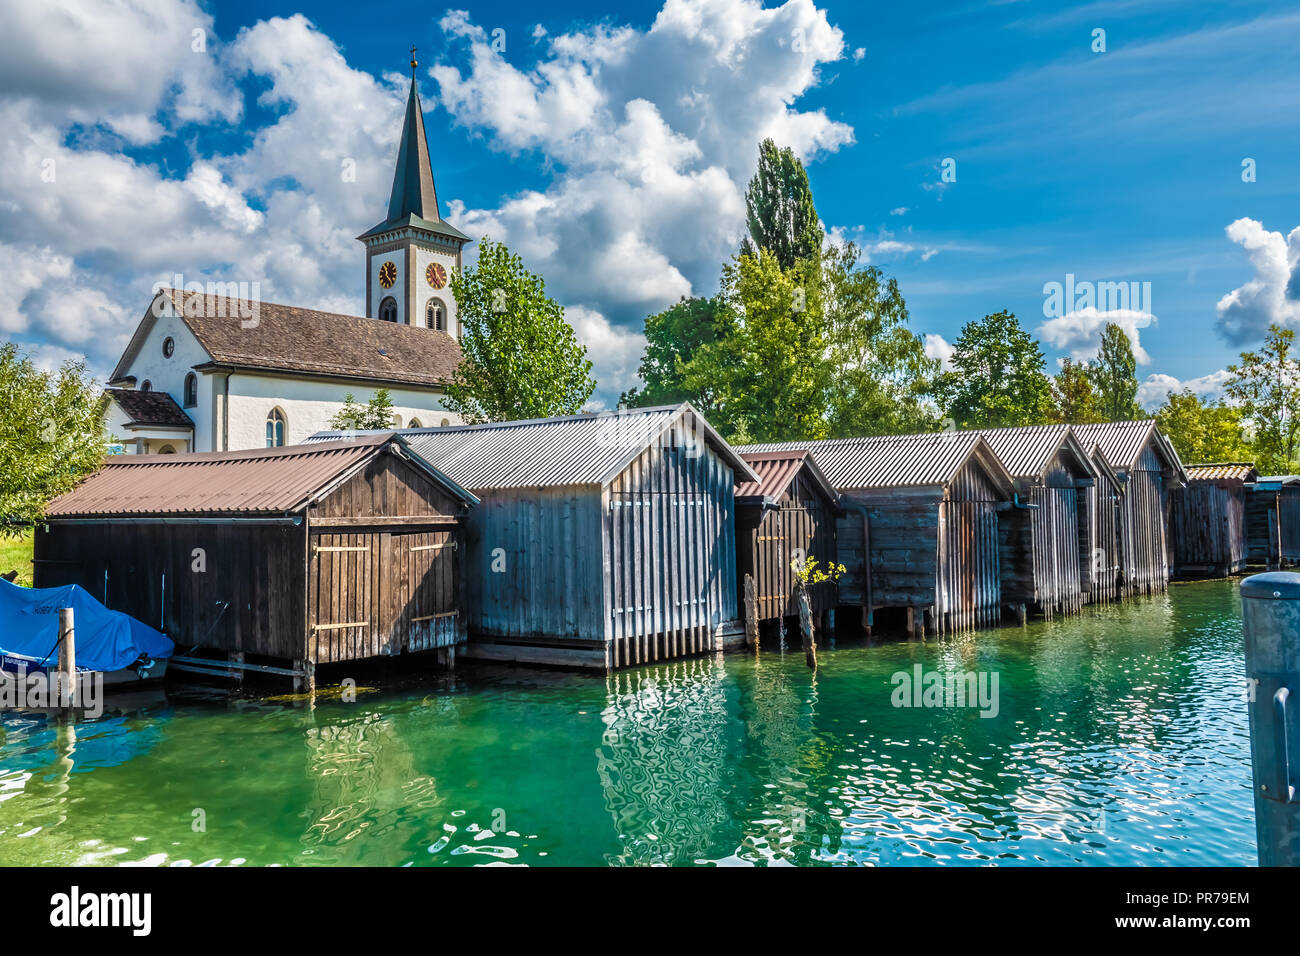 The beautiful historical village of Busskirch on the shores of the Upper Zurich Lake (Obersee), Rapperswil-Jona, Sankt Gallen, Switzerland Stock Photo